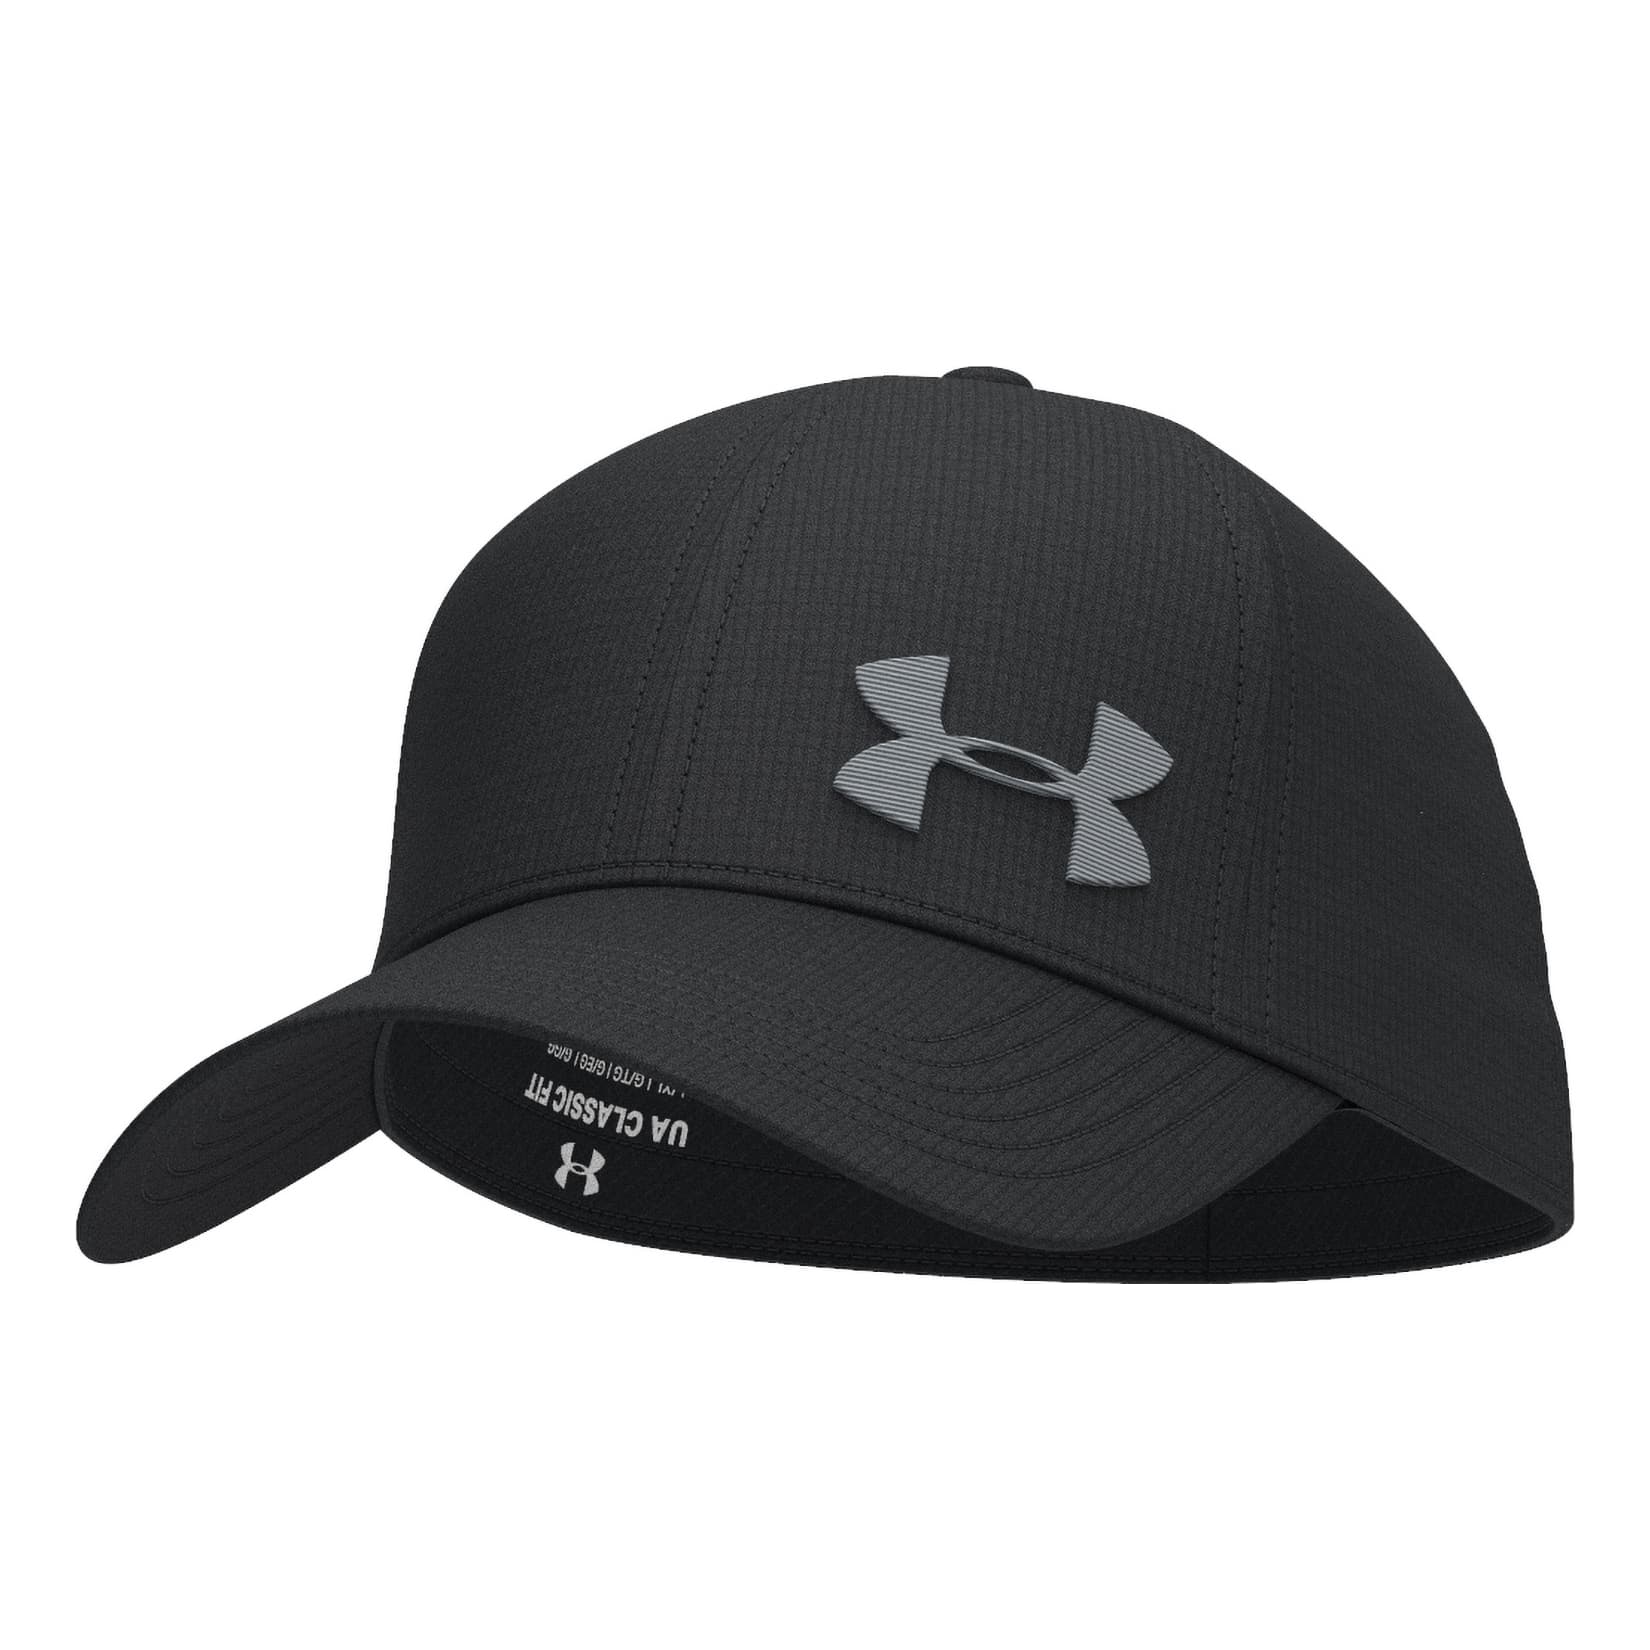 Under Armour® Men's Iso-Chill ArmourVent™ Stretch Hat